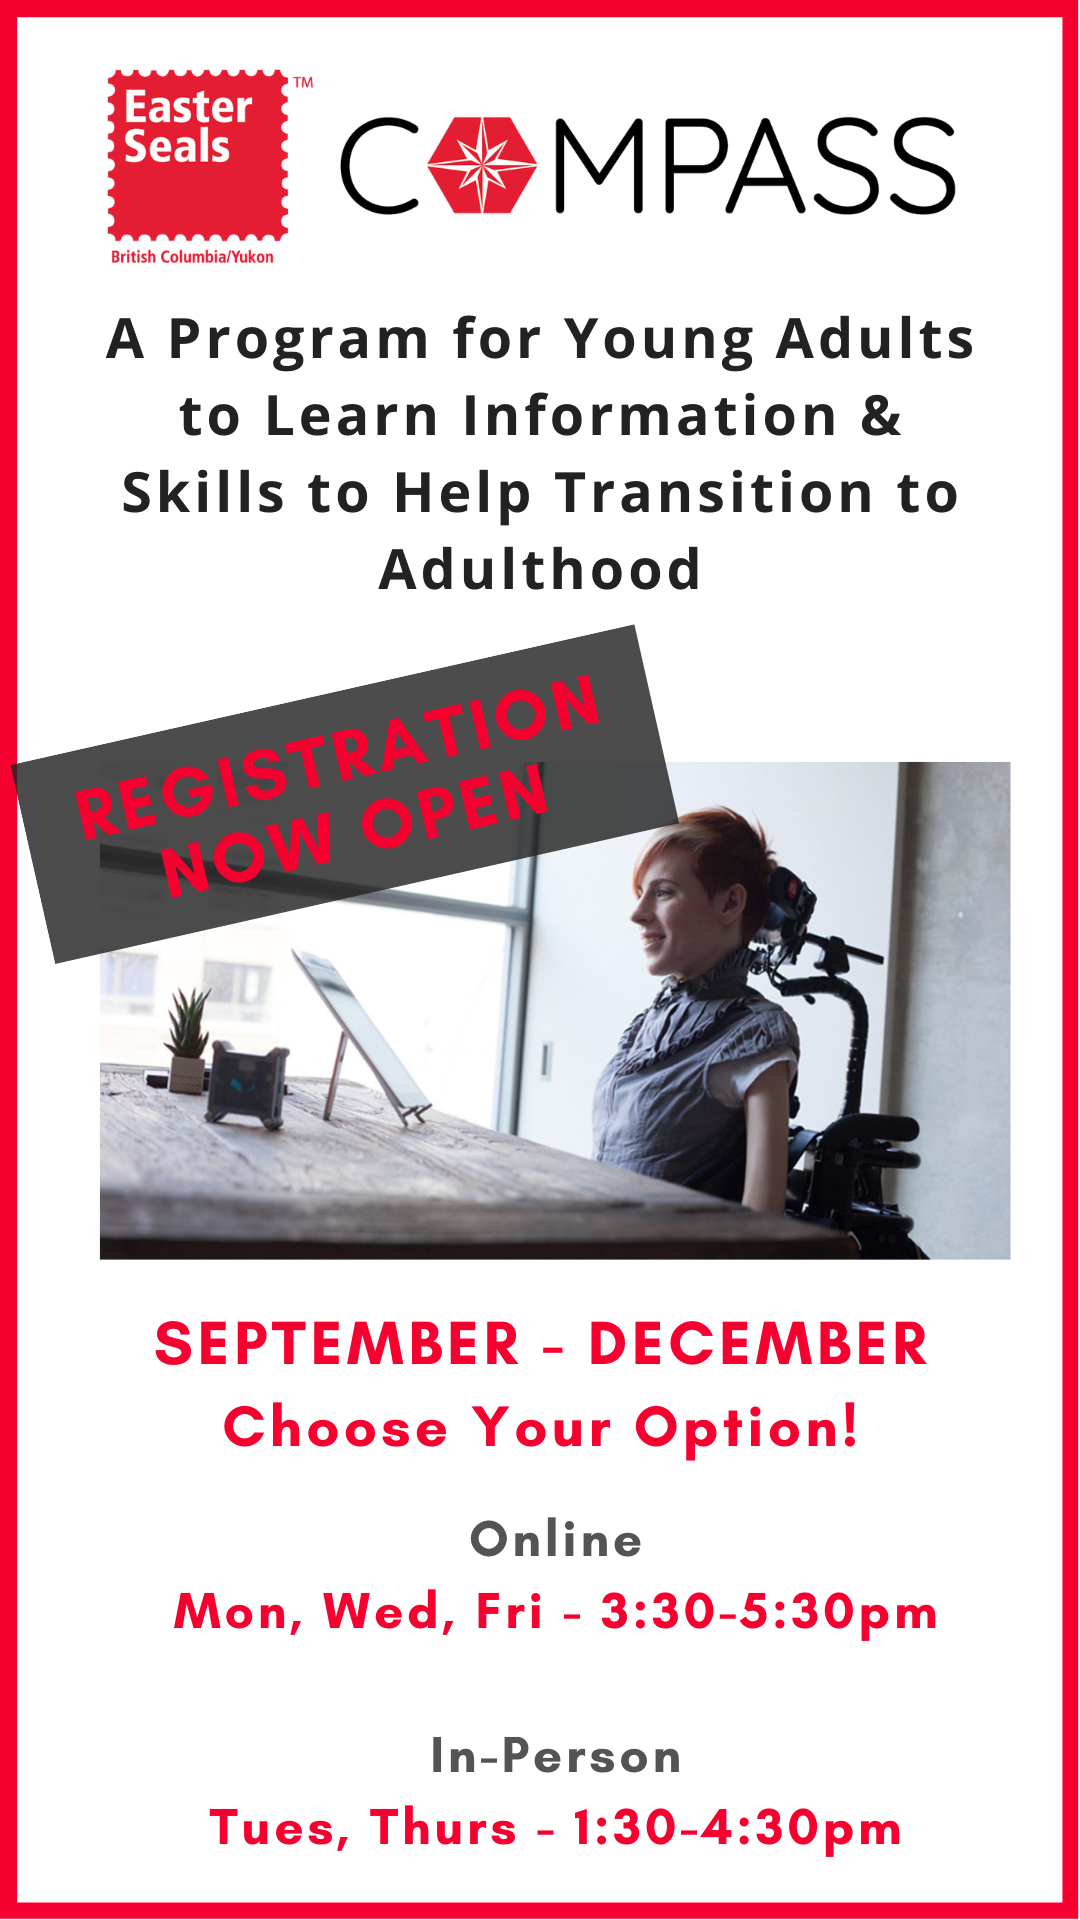 Easter Seals Compass Program for Young Adults - In-Person Option